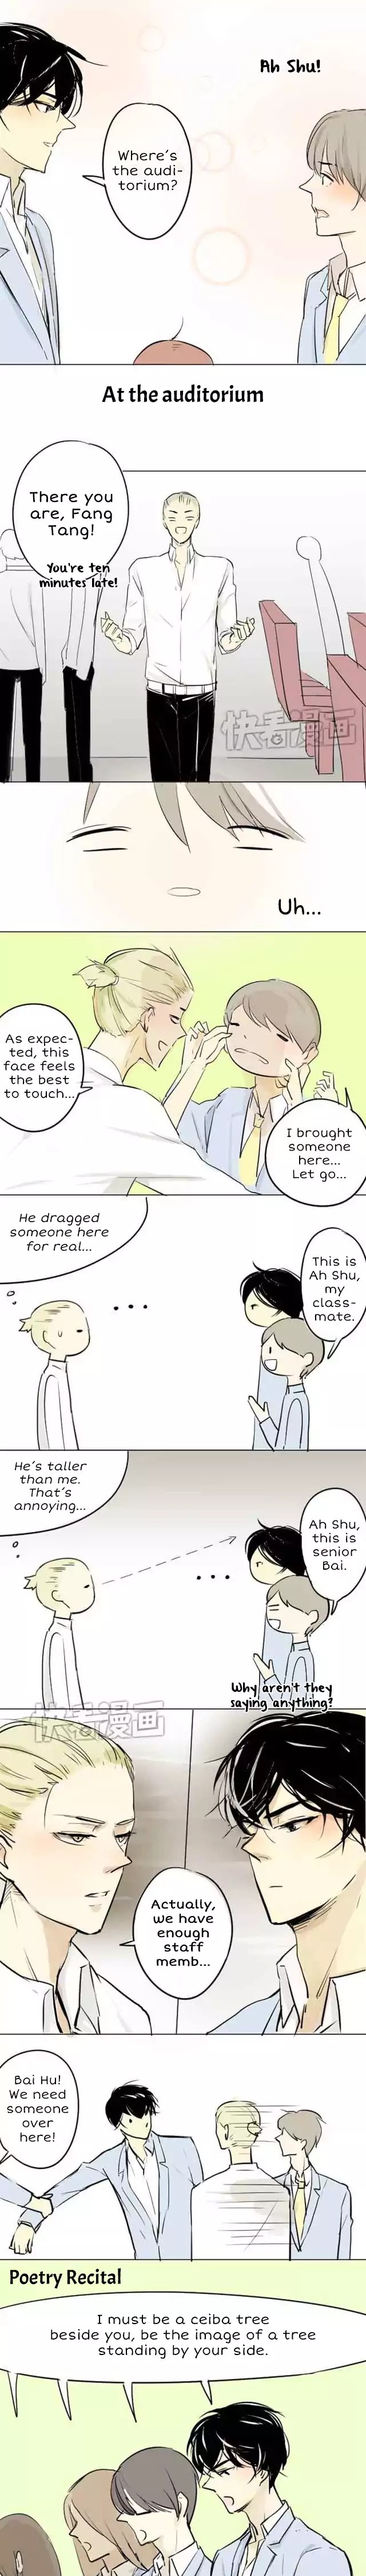 Classmate Relationship? - Page 2